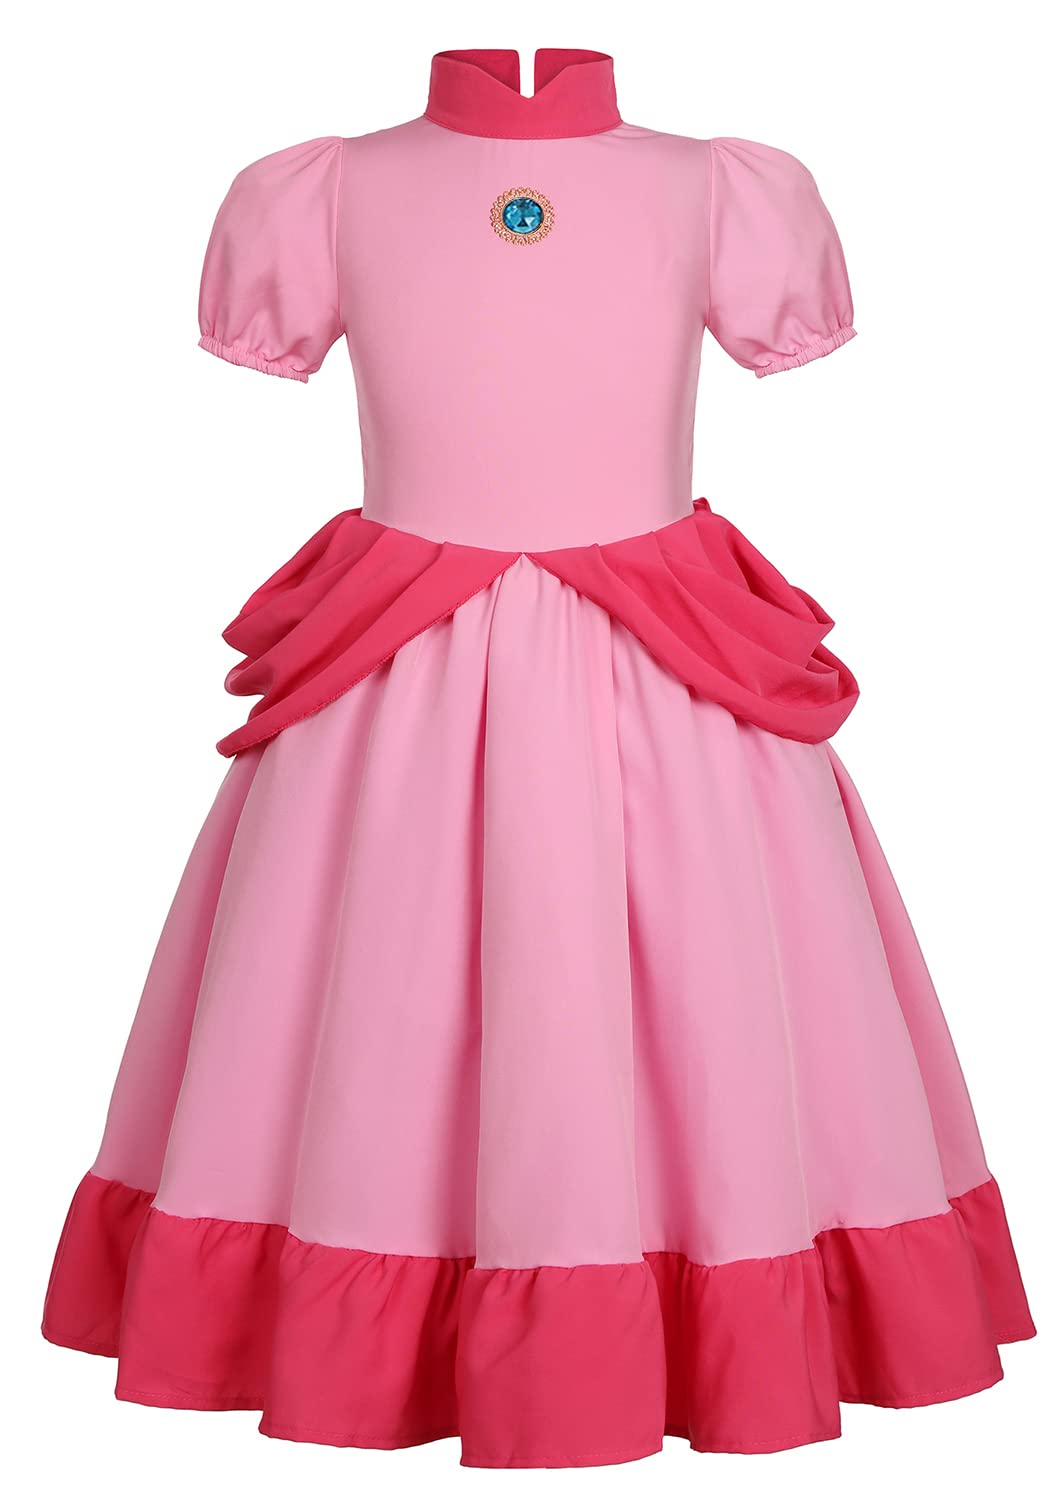 Girls Peach Costume Princess Dress With Crown for Deluxe Halloween Party Dress Up, 5-6 Years